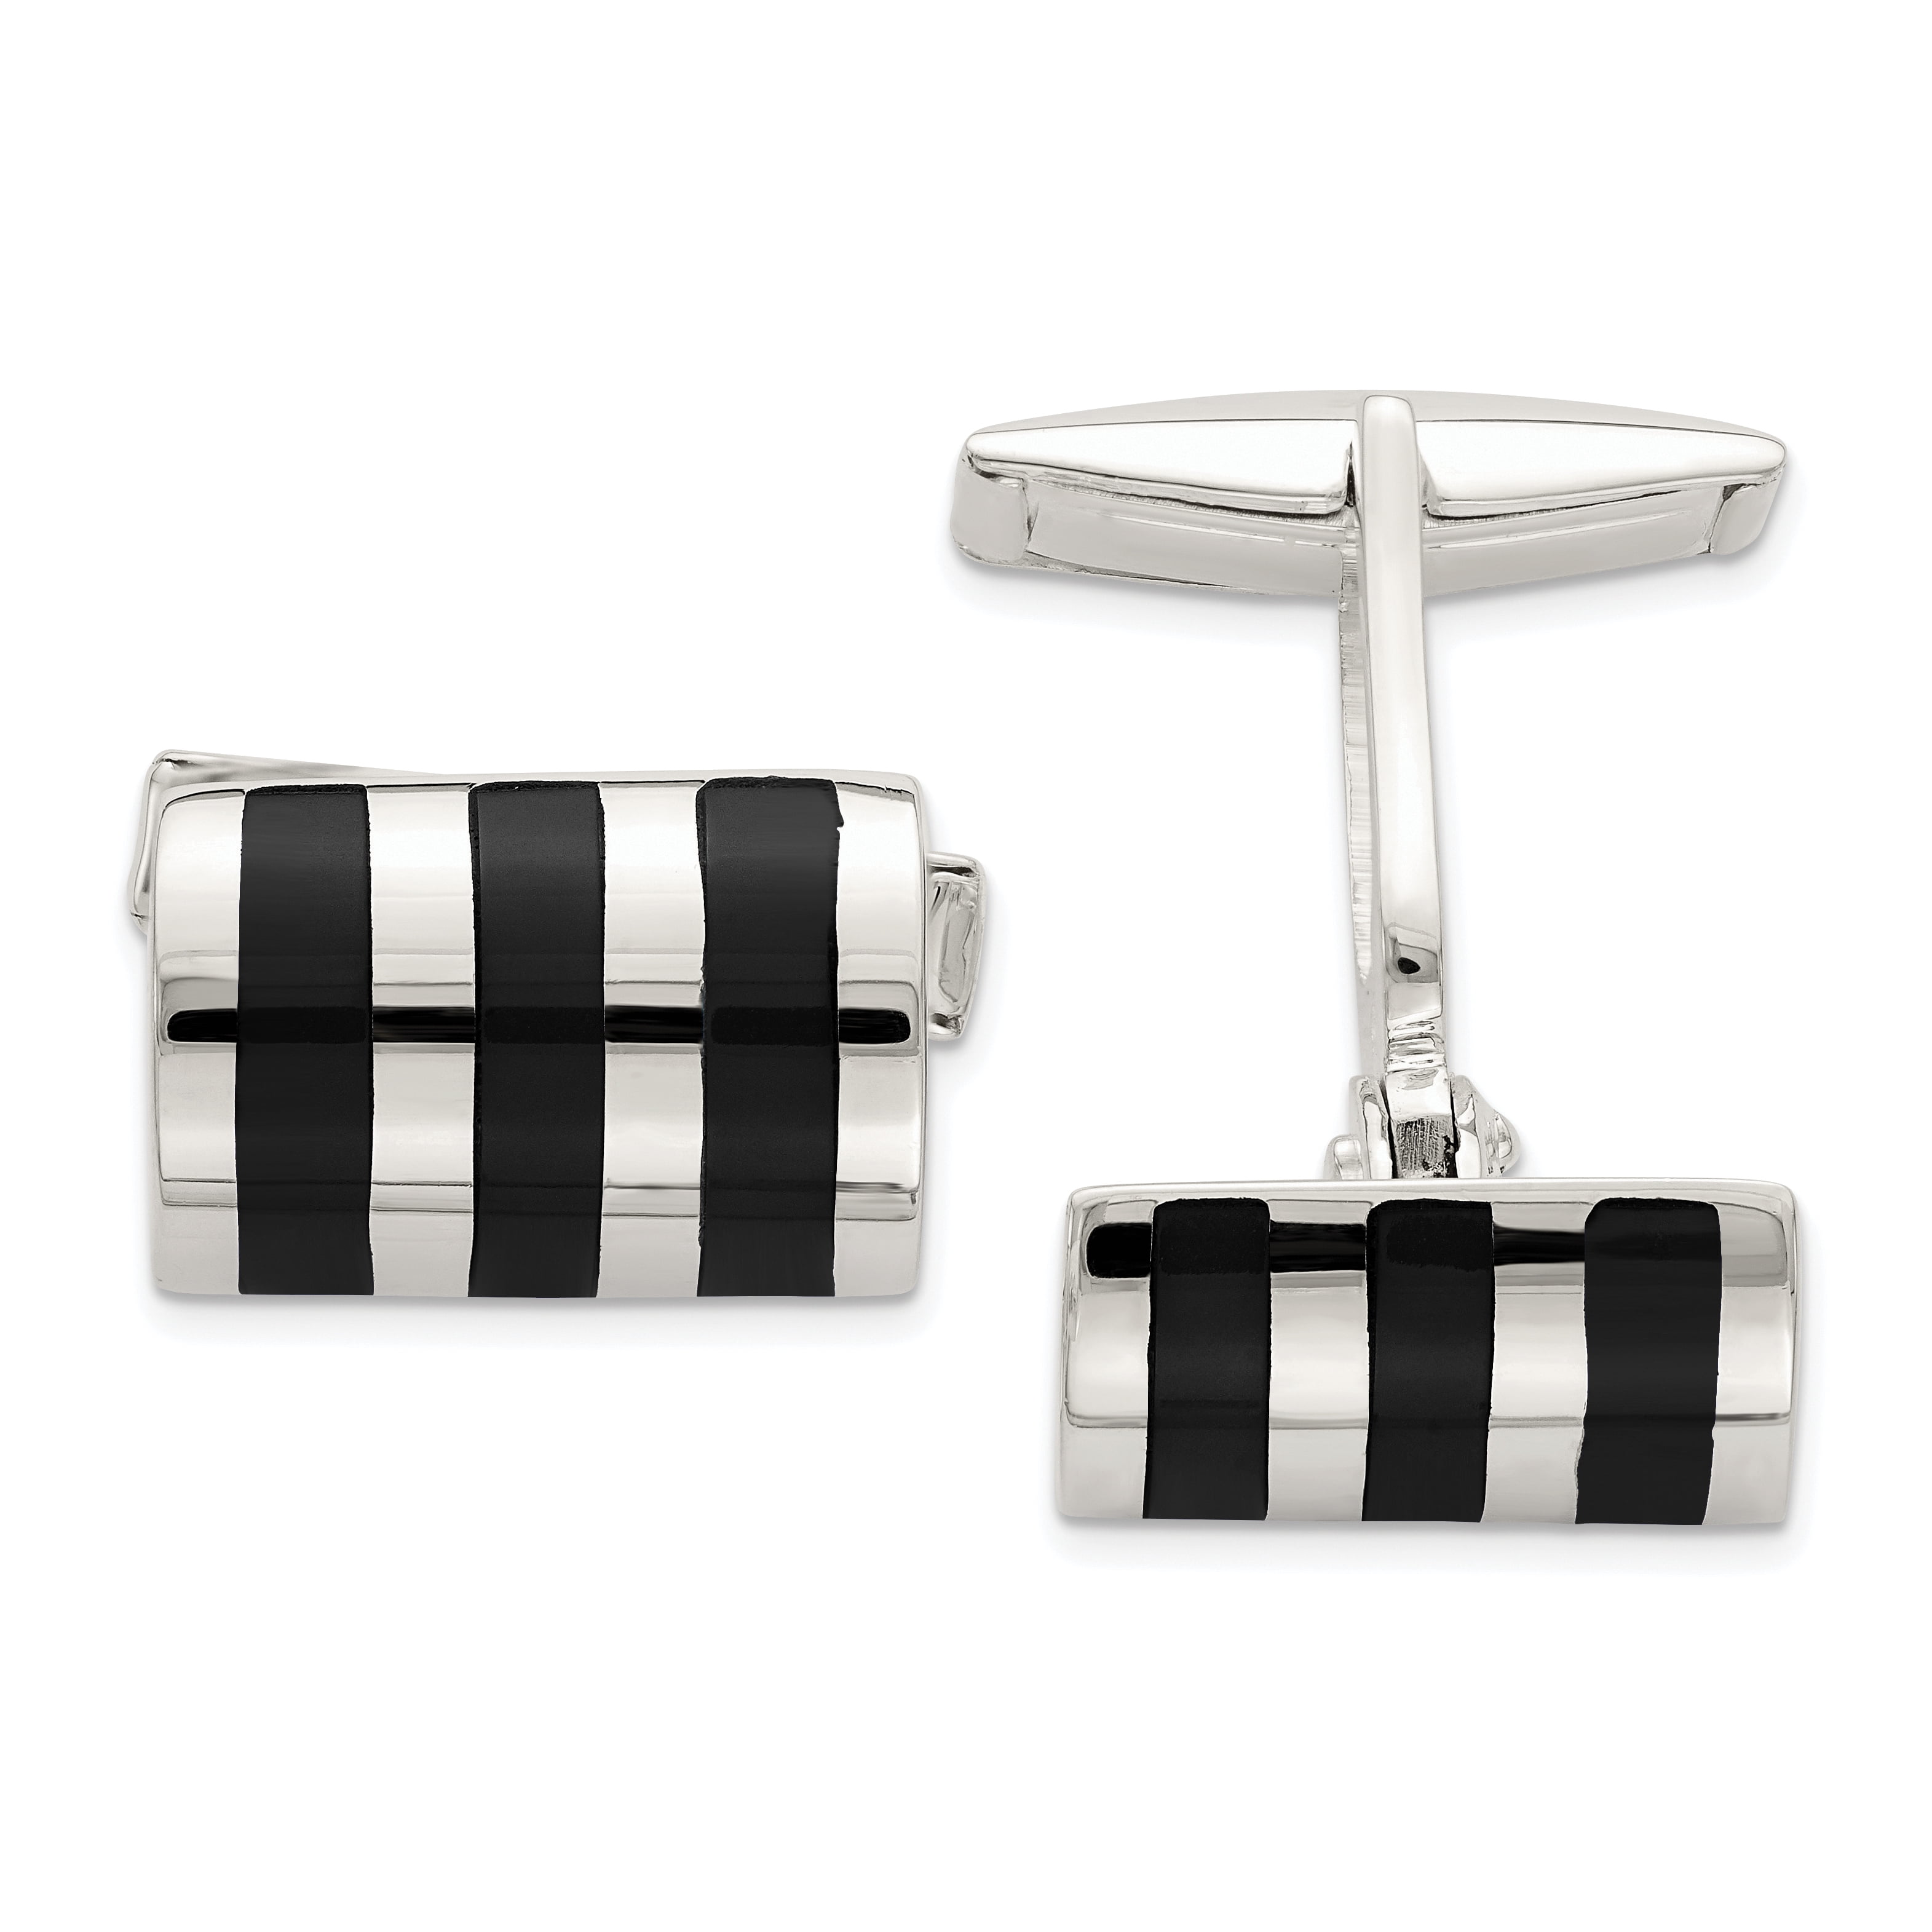 Black Onyx Cufflinks Double Sided Gems Mens 925 Sterling SILVER Jewelry Gift NEW 